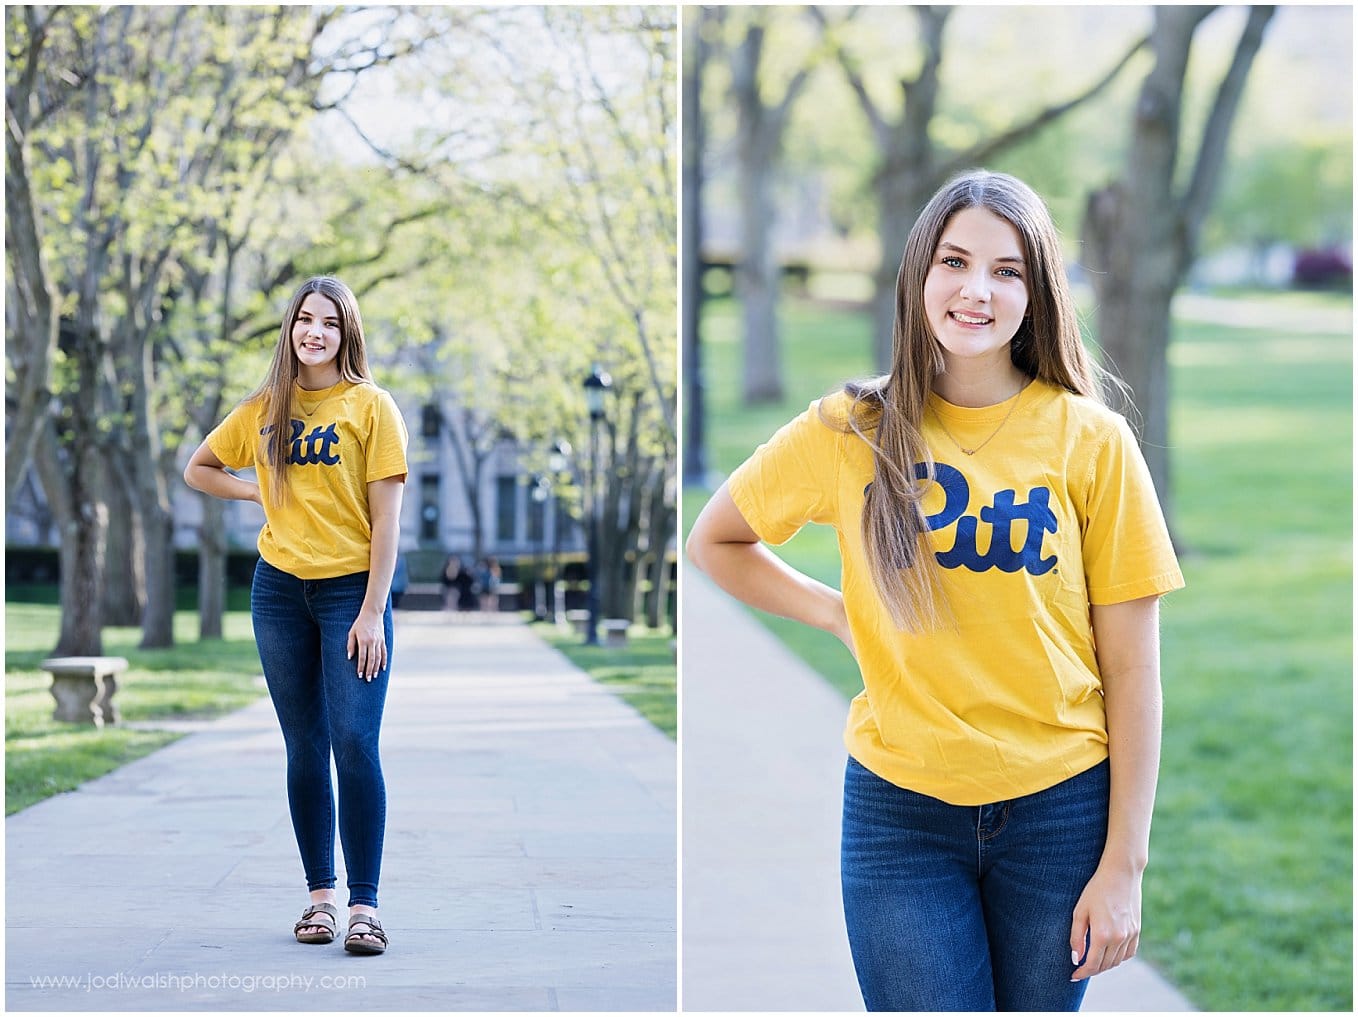 Spring senior portraits at Pitt.  Two images of a senior girl wearing jeans and a yellow and blue University of Pittsburgh t-shirt.  She's standing on the sidewalk and smiling, near the Cathedral of Learning.